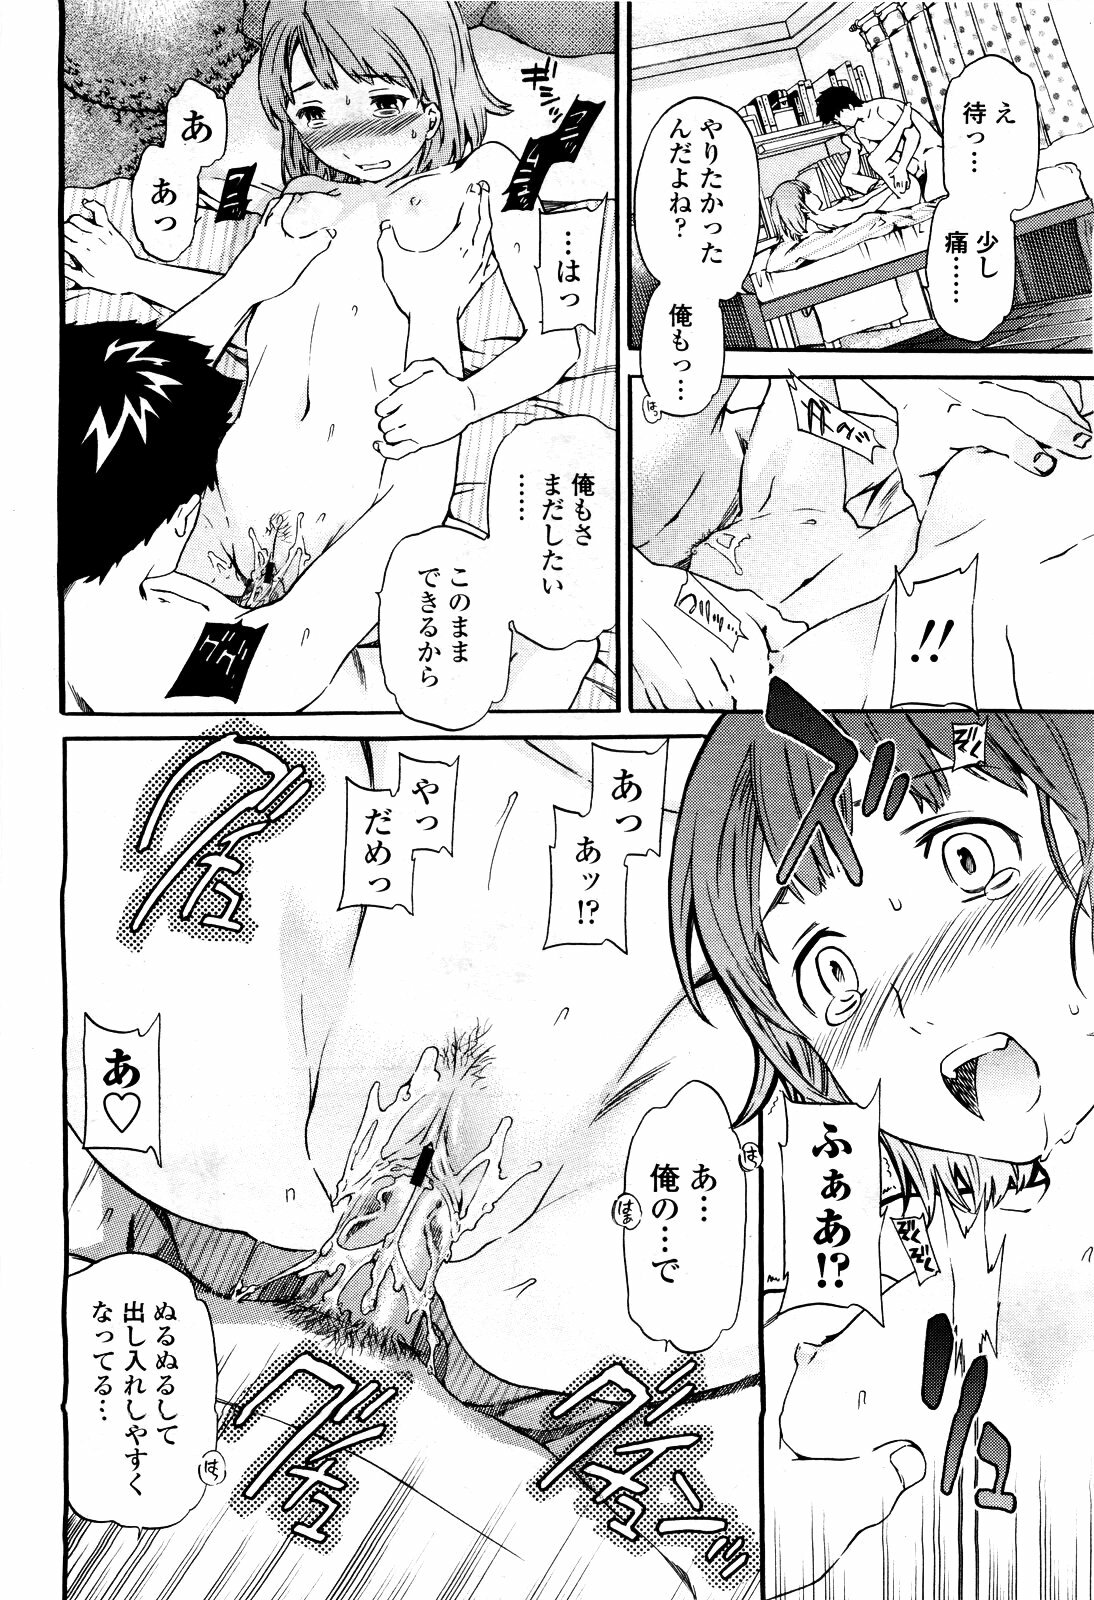 COMIC Momohime 2010-03 page 40 full